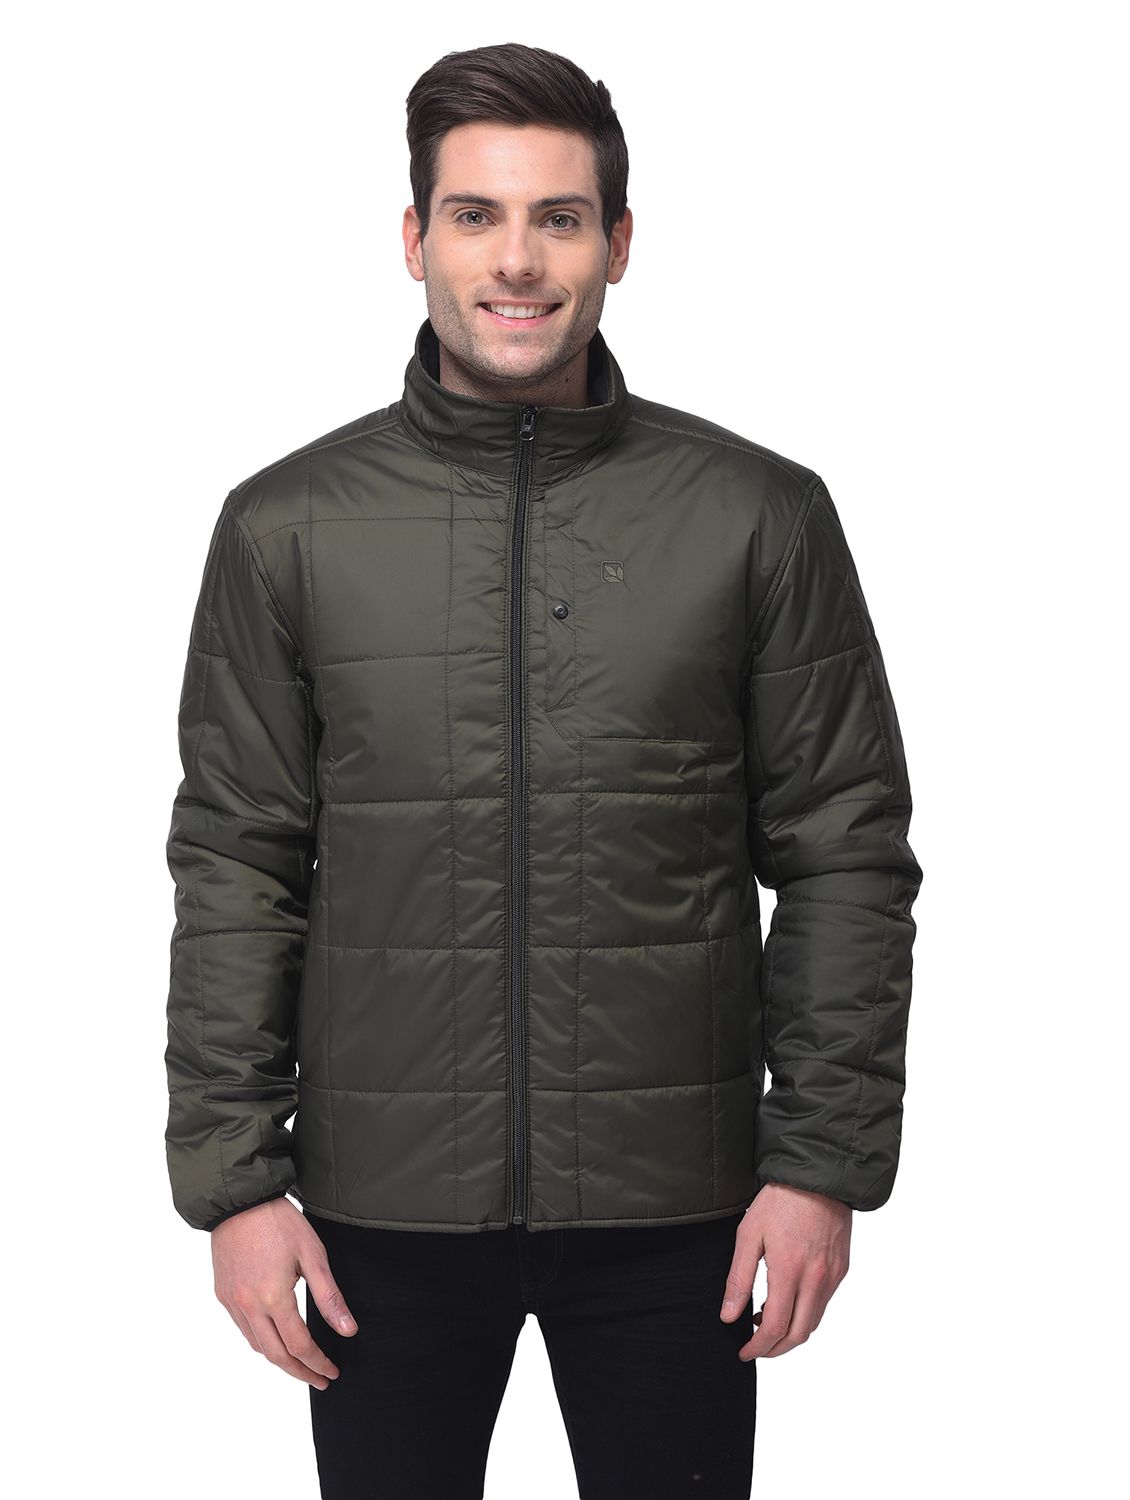 olive quilted jacket for men 3 297 mrp 5 495 40 % off prices include ...